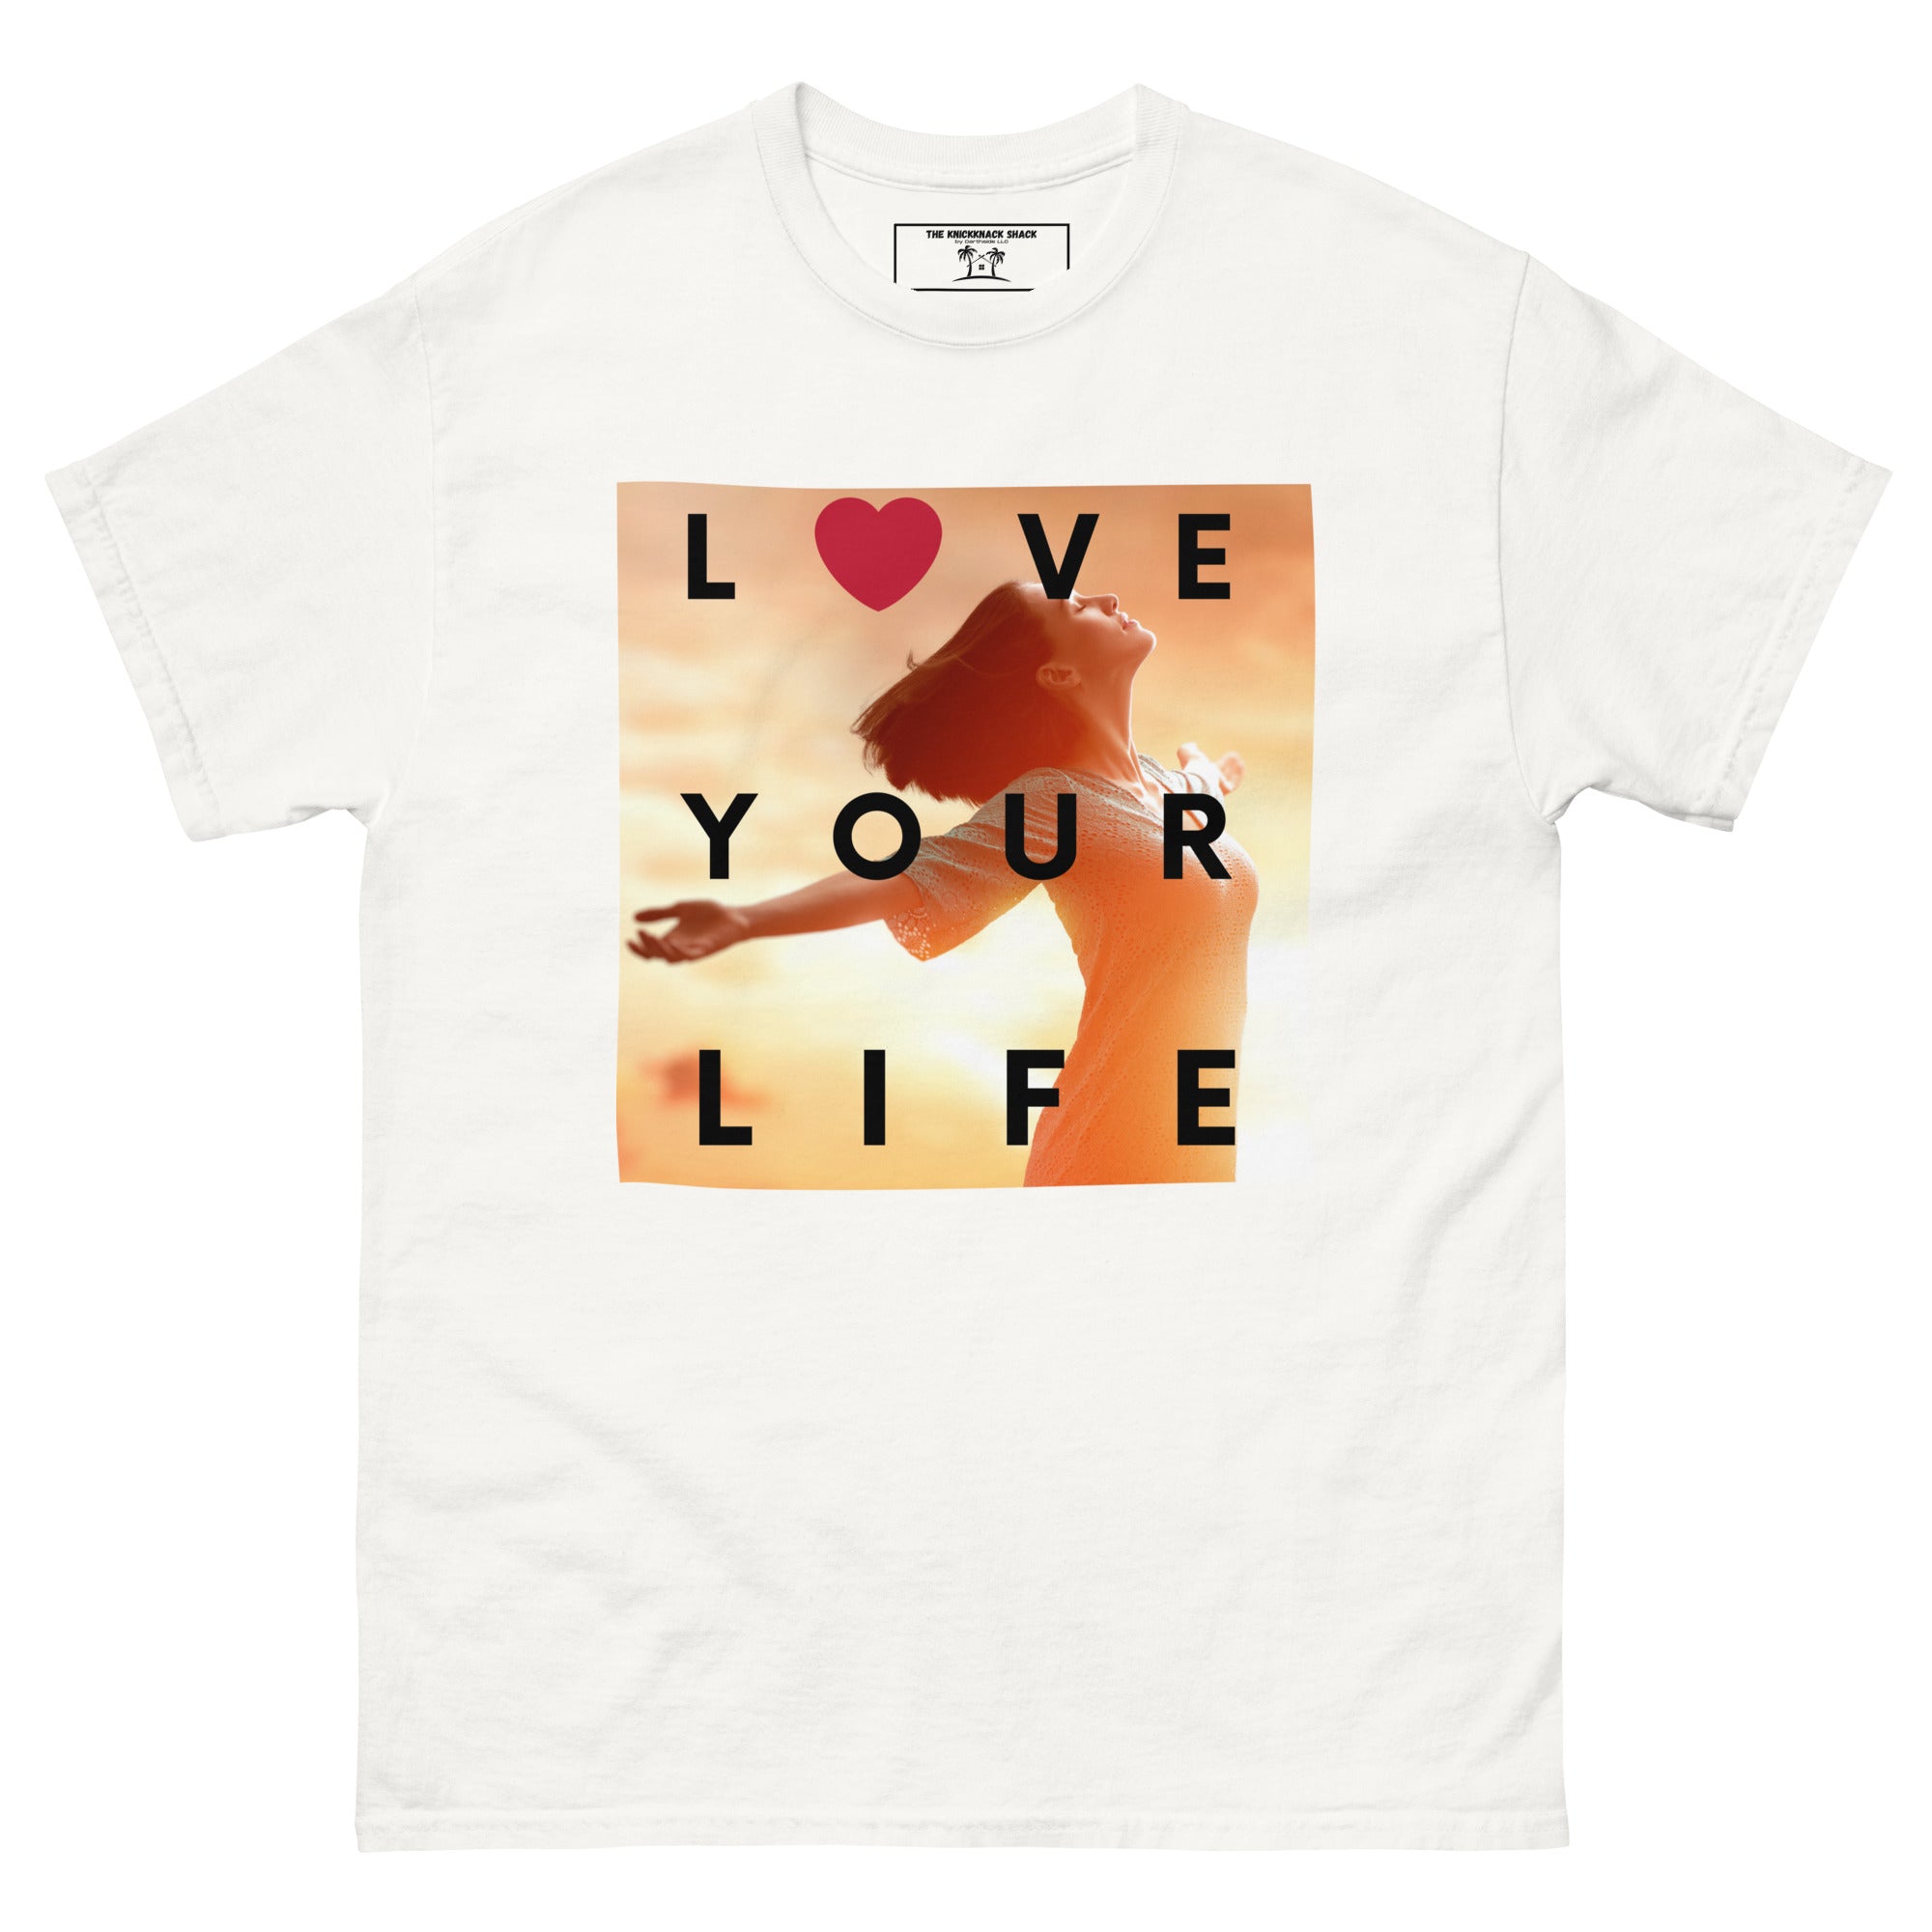 Classic Tee - Love Your Life (Light Colors)